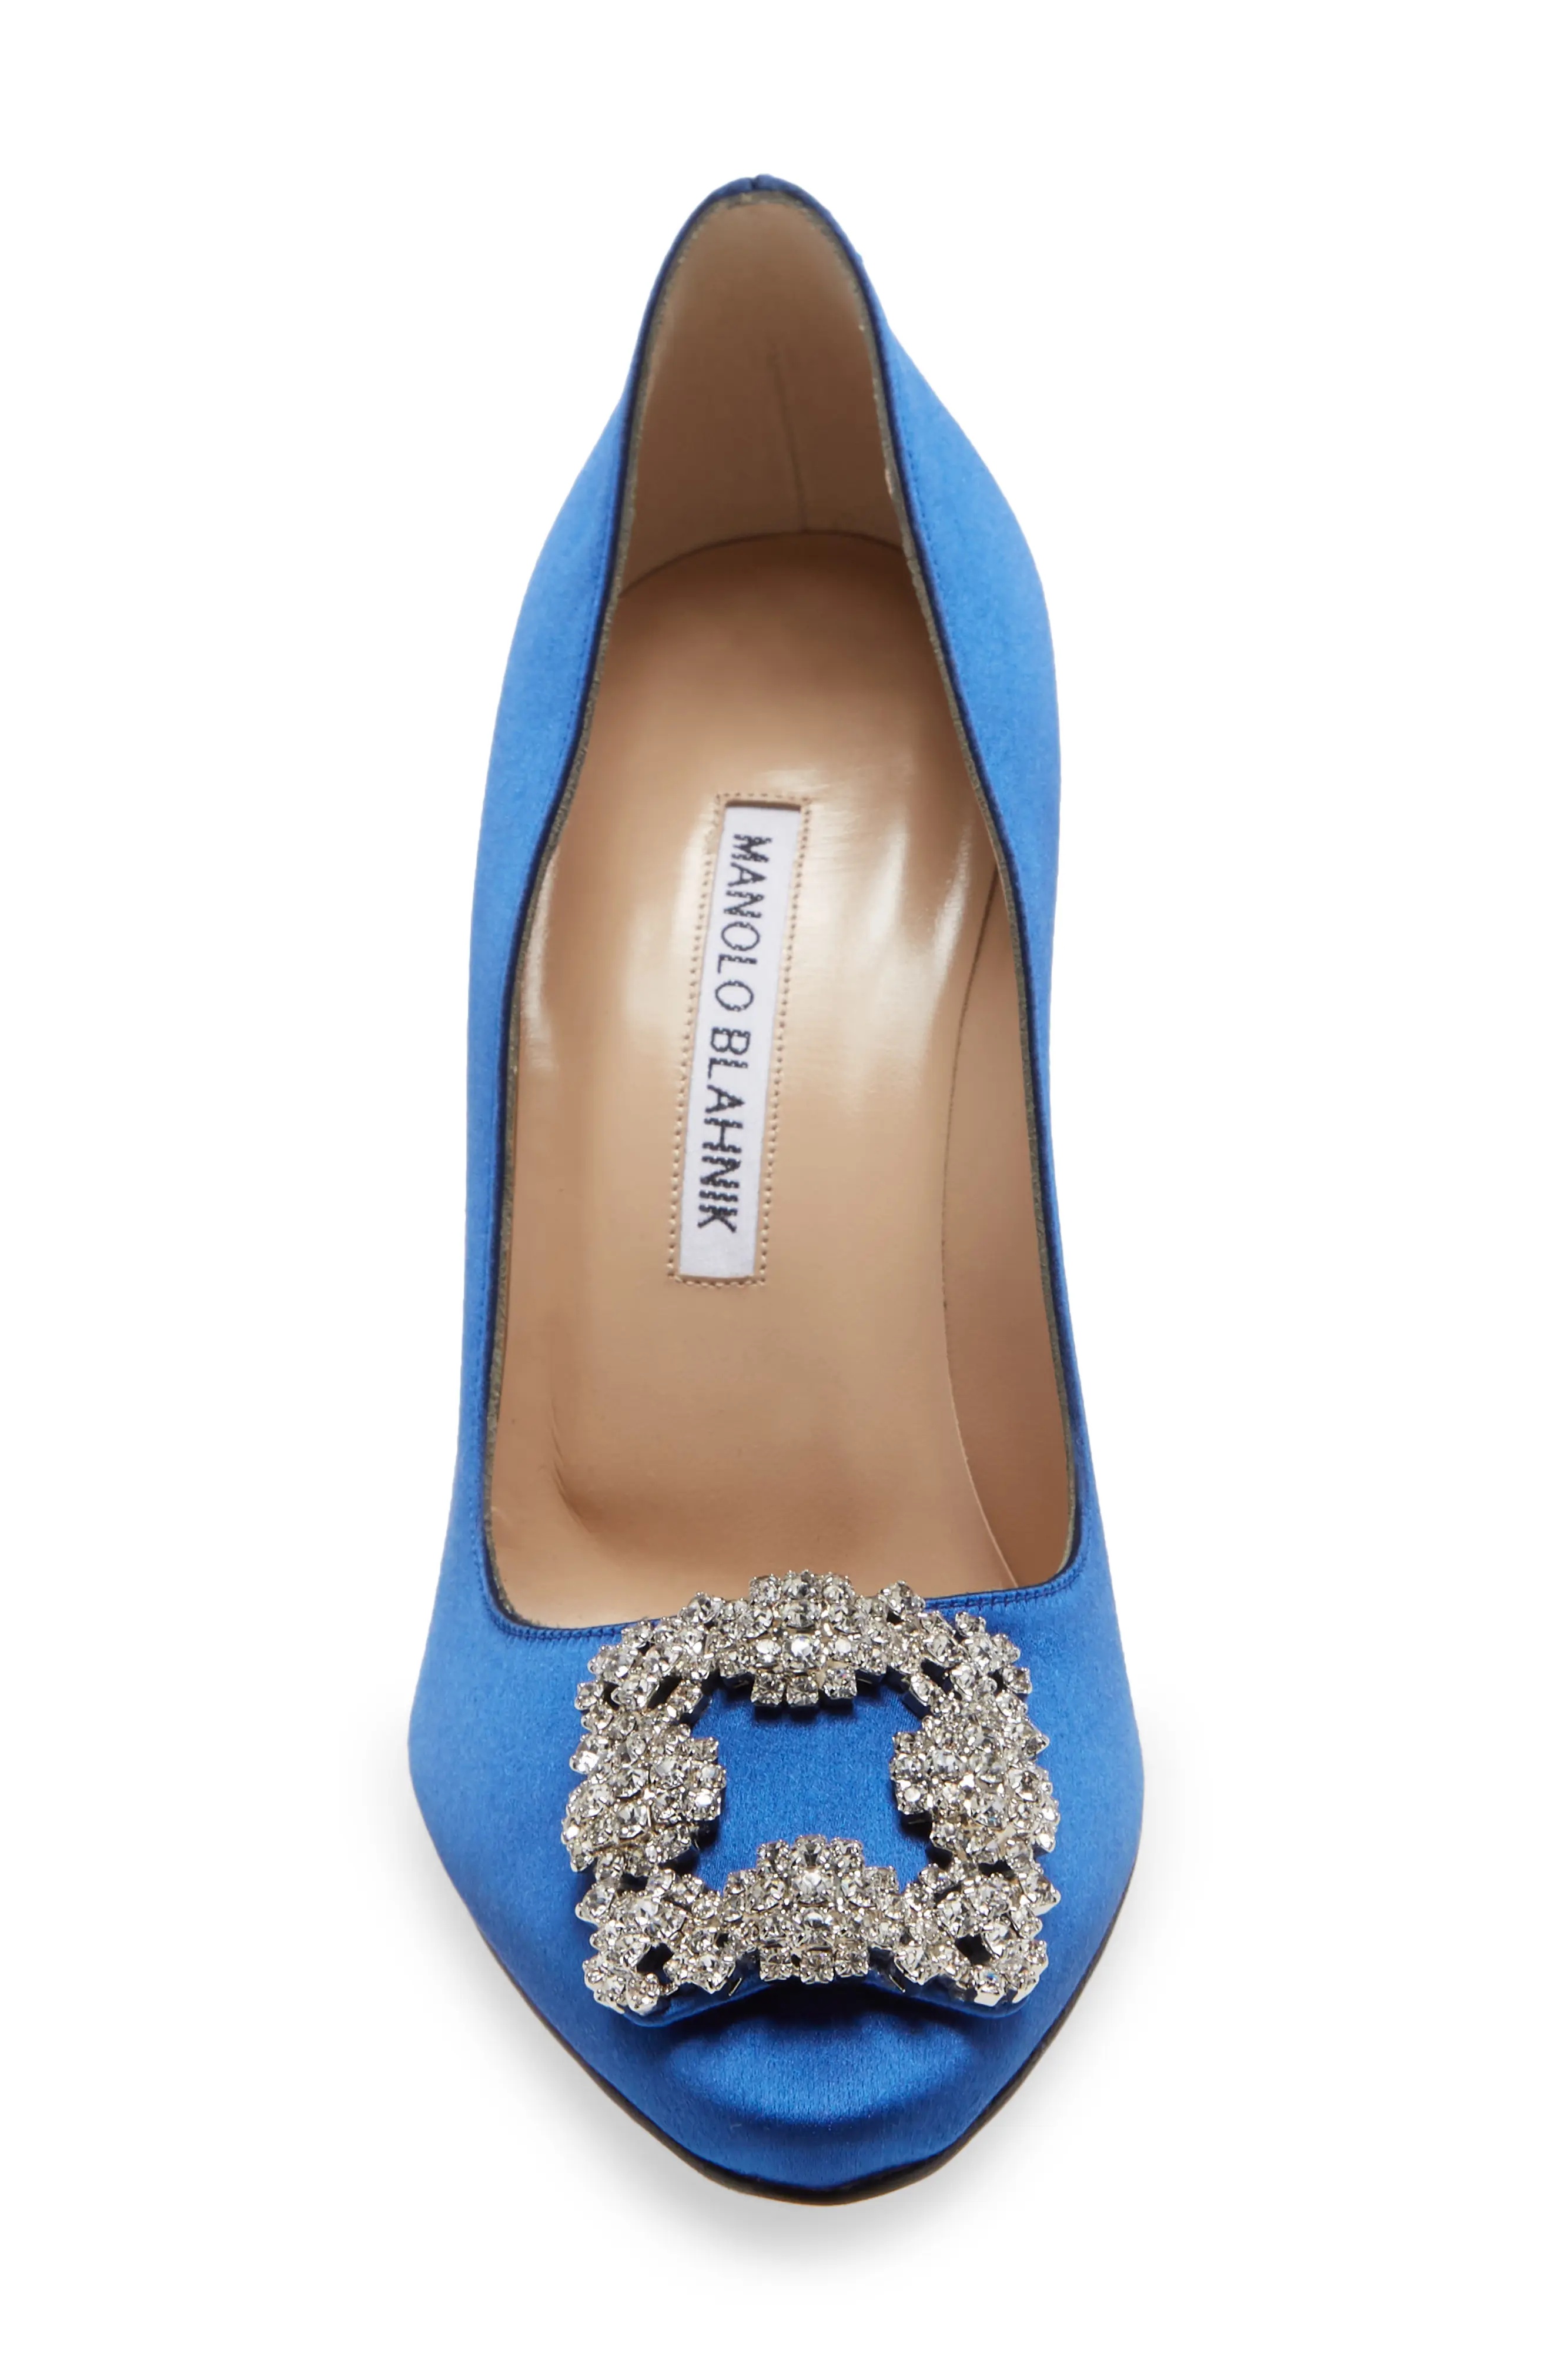 Hangisi Crystal Buckle Pump in Blue Satin Clear/Buckle - 4